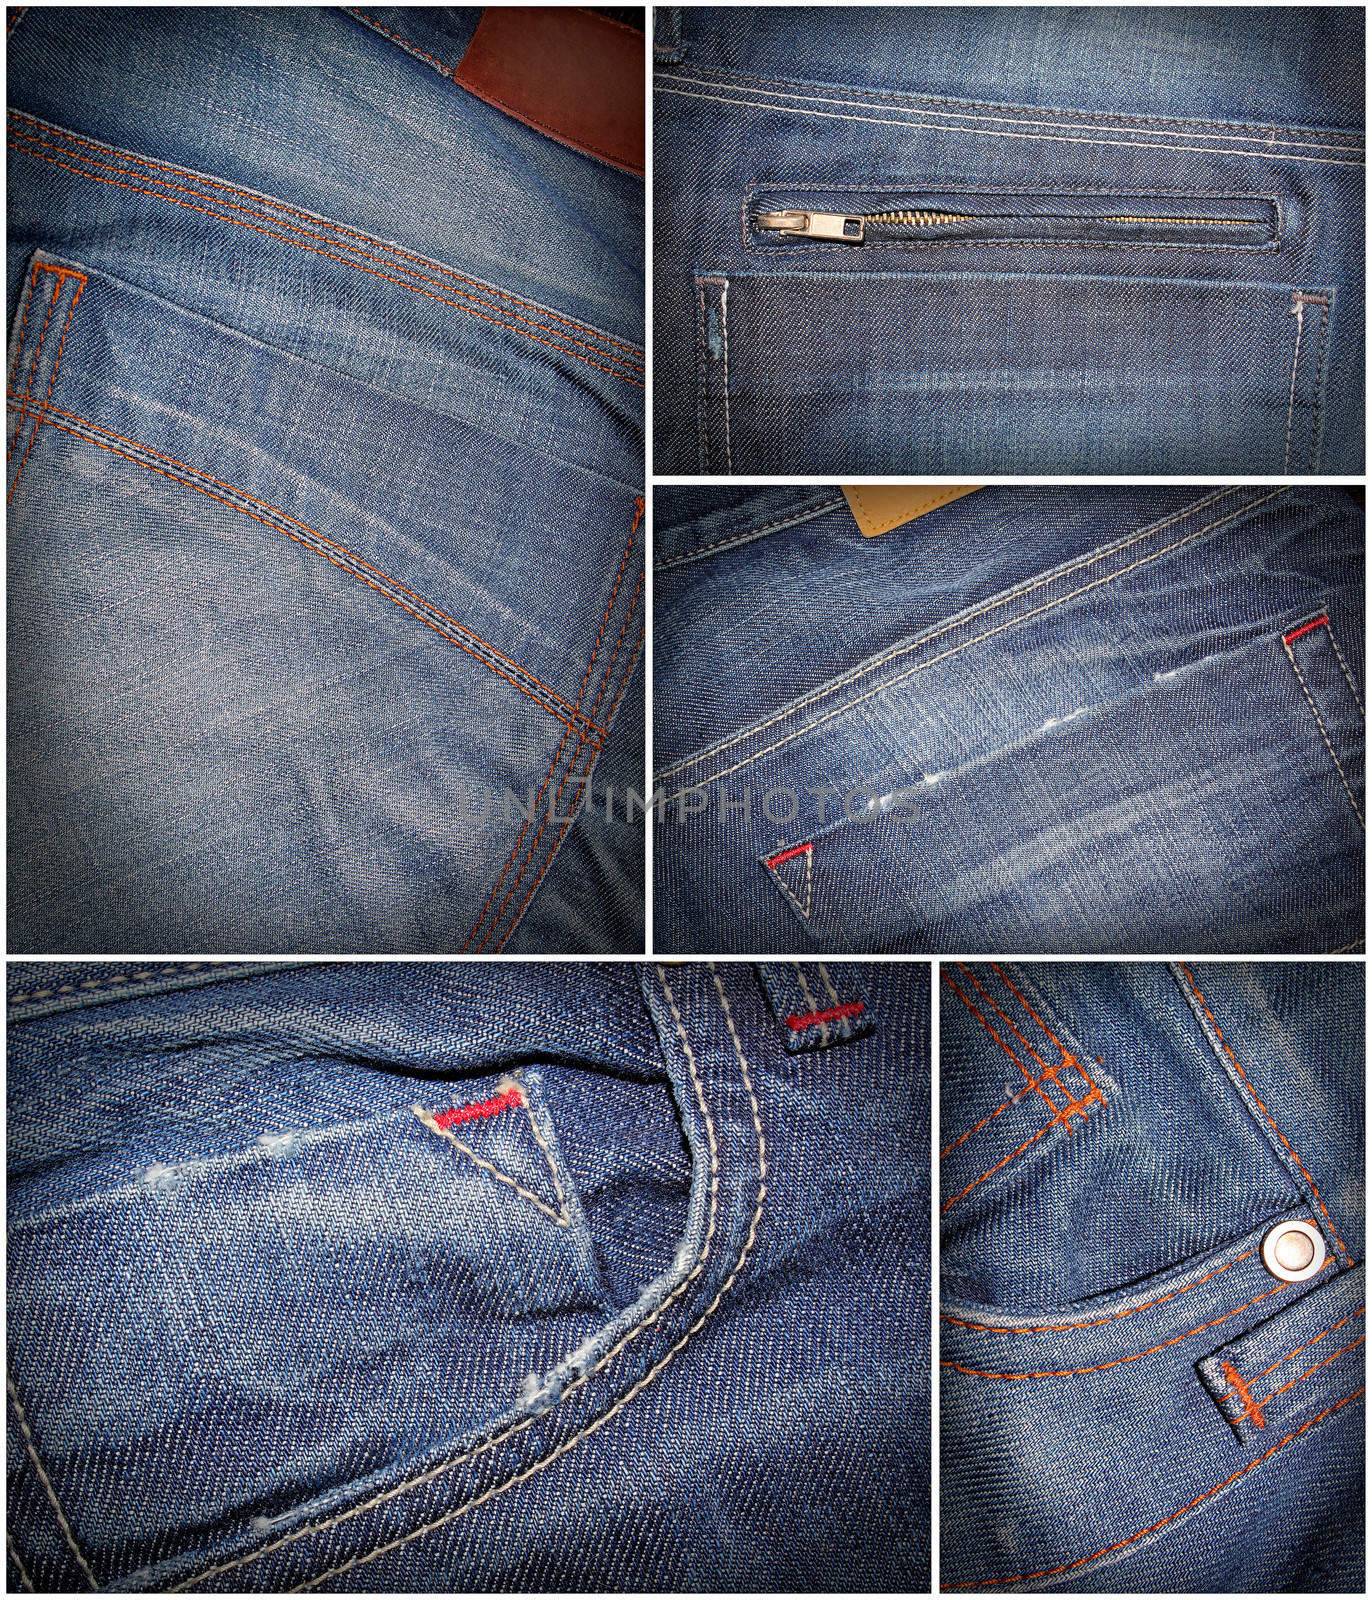 Several jeans photos in a collage